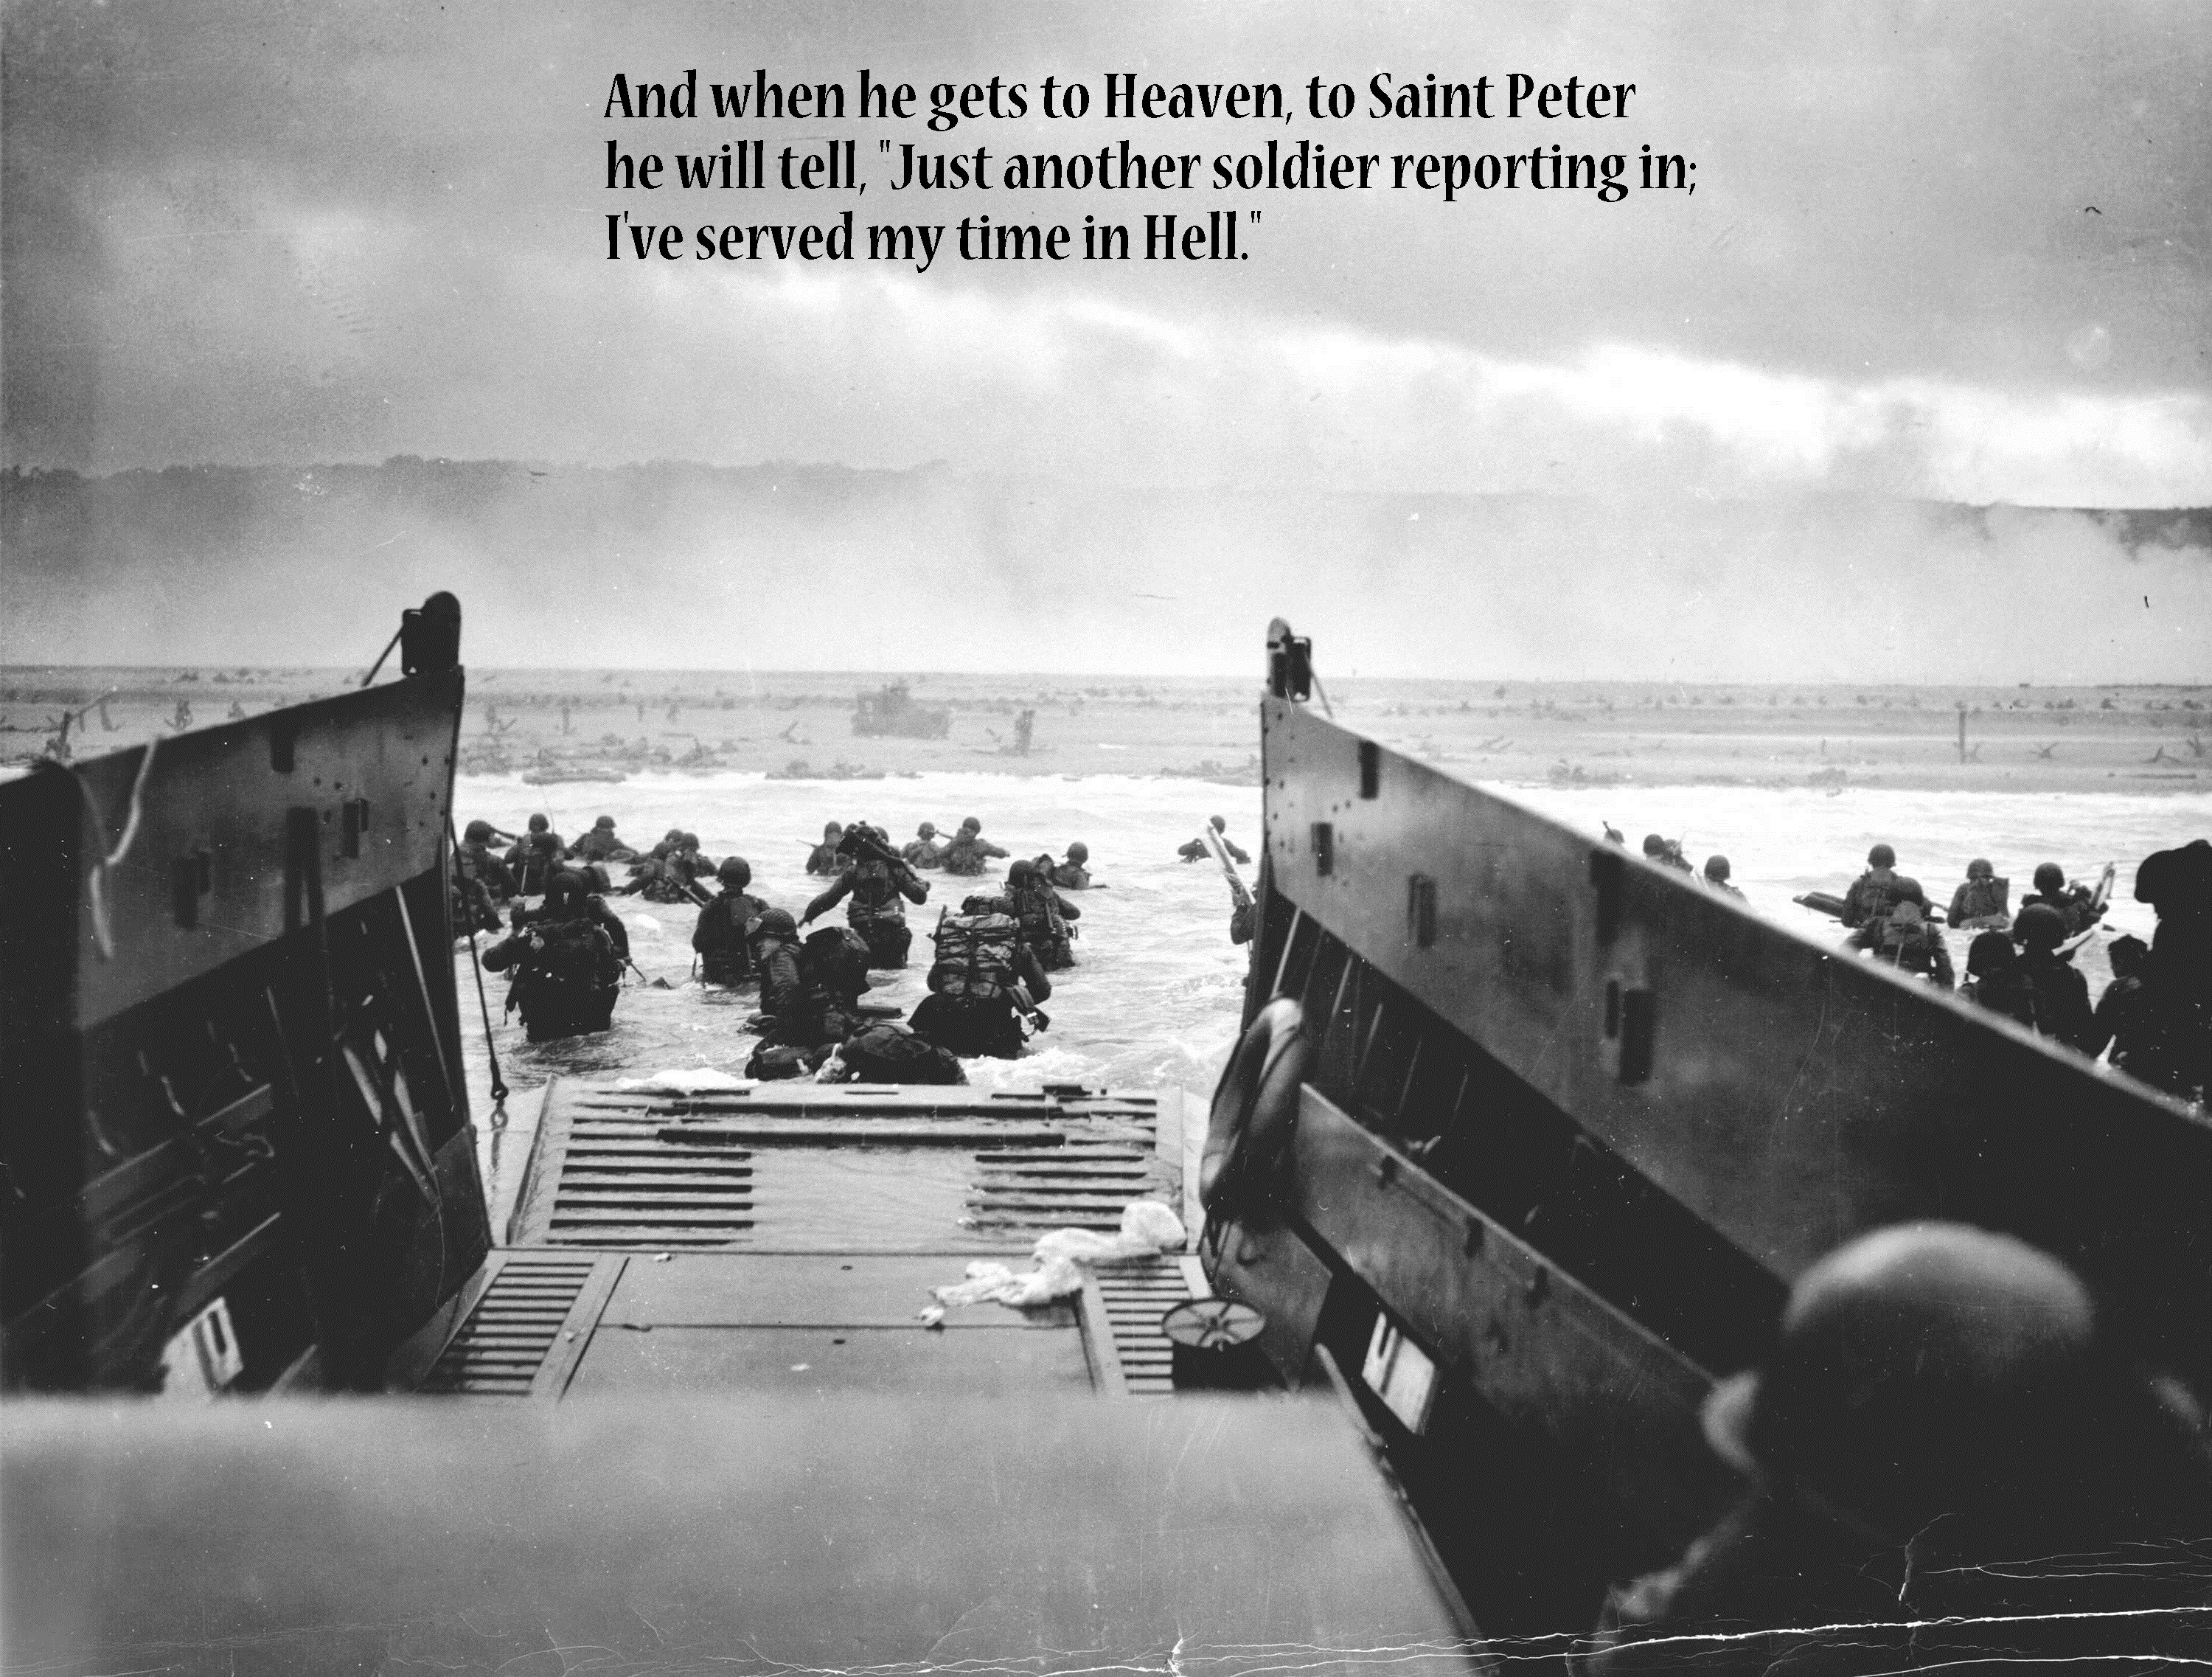 General 3000x2274 quote World War II military monochrome 1944 (Year) vintage soldier D-Day text